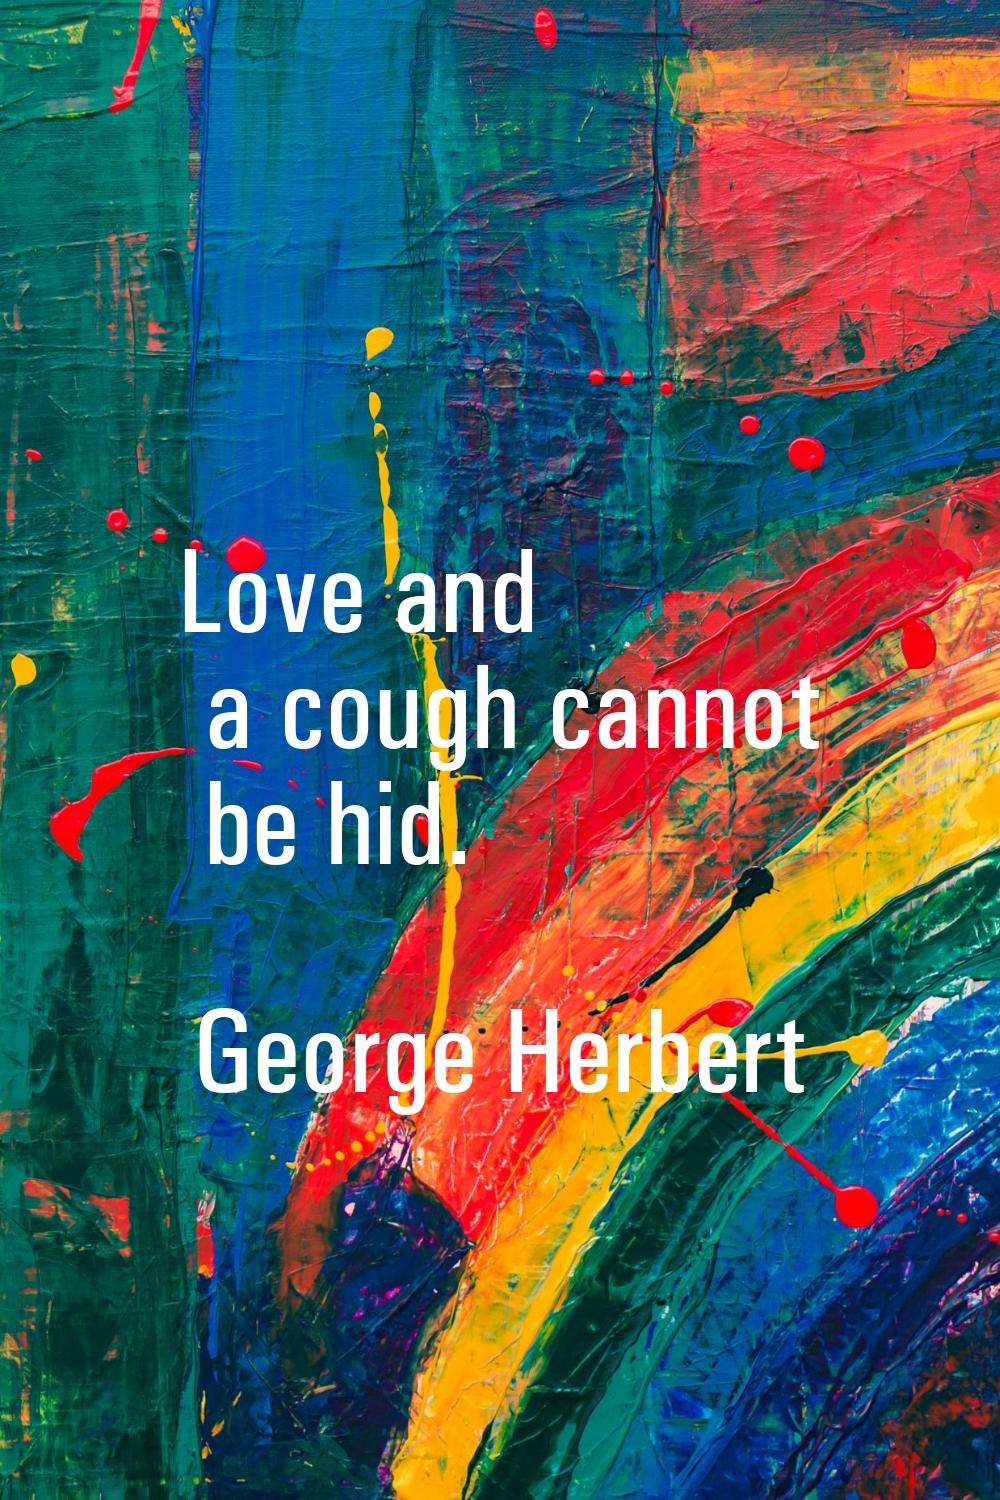 Love and a cough cannot be hid.